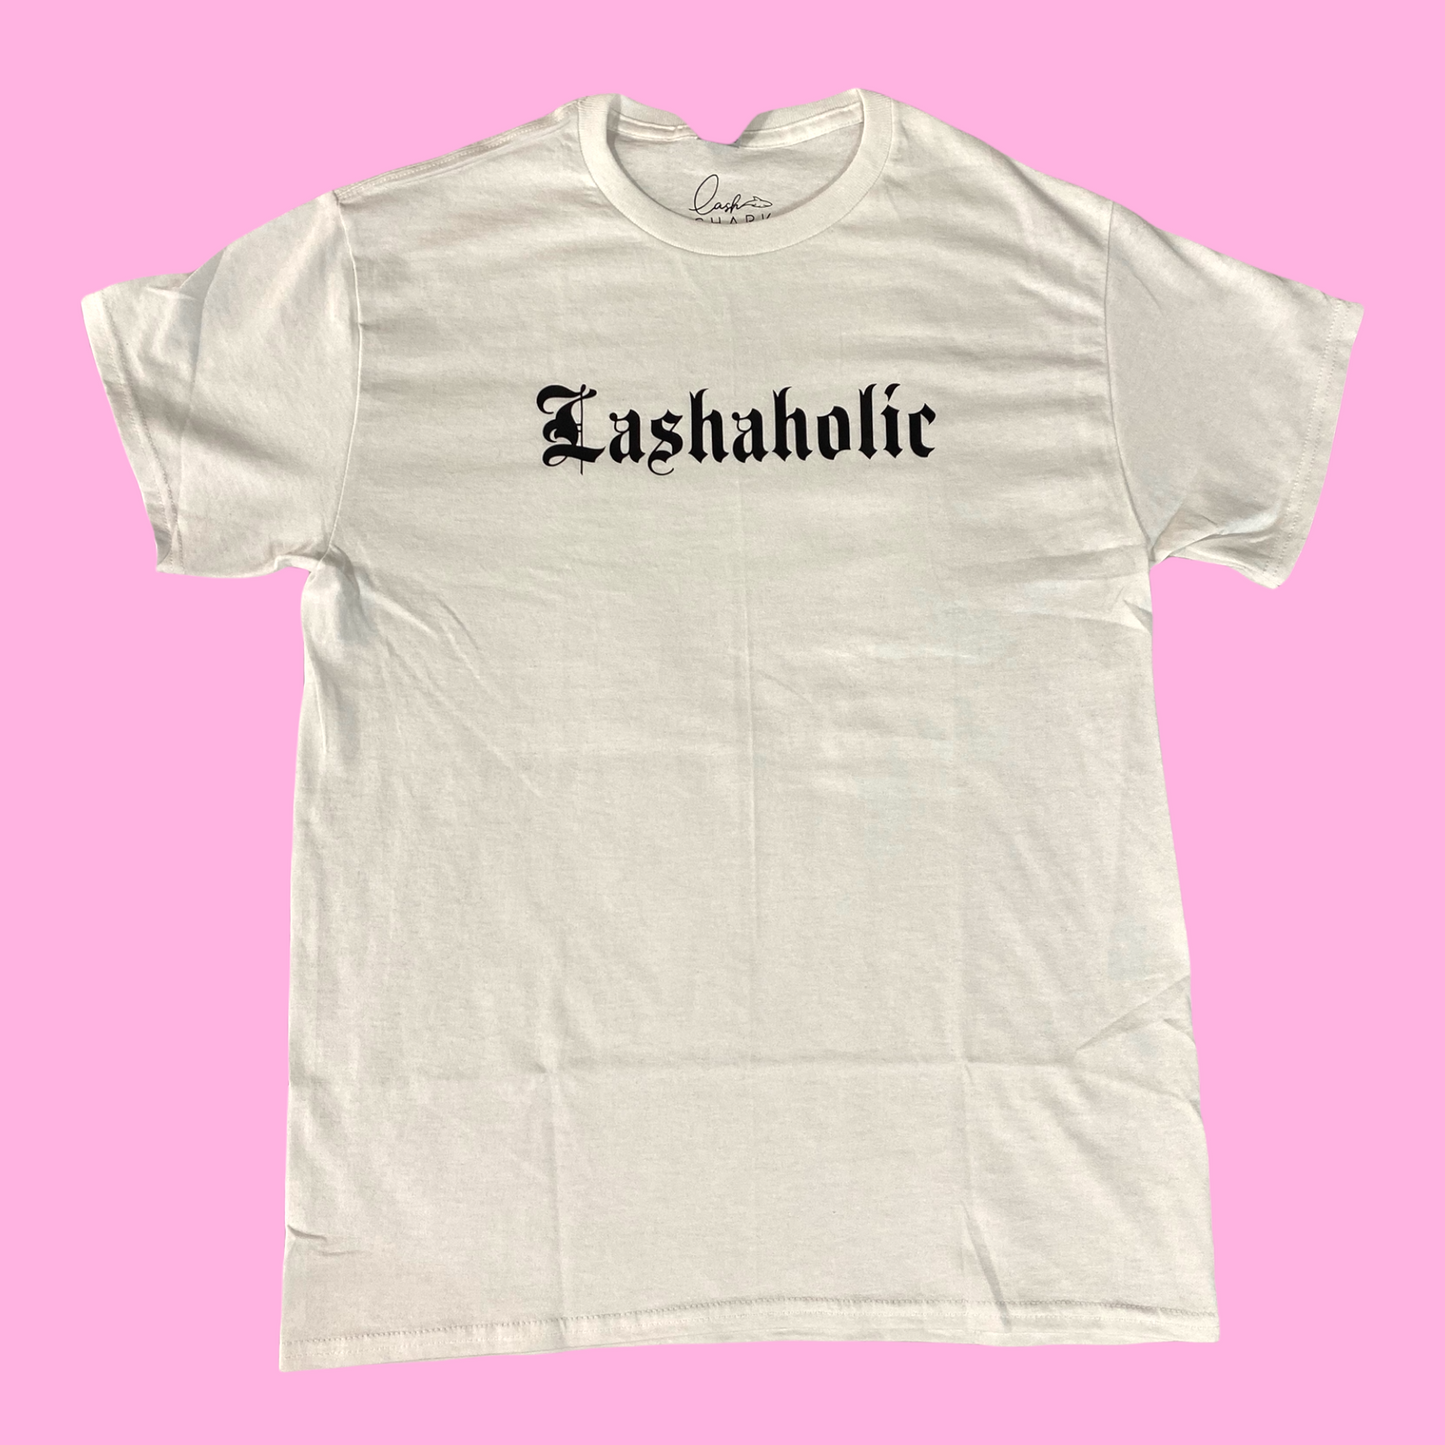 T-SHIRT - LASHAHOLIC( relaxed fit )